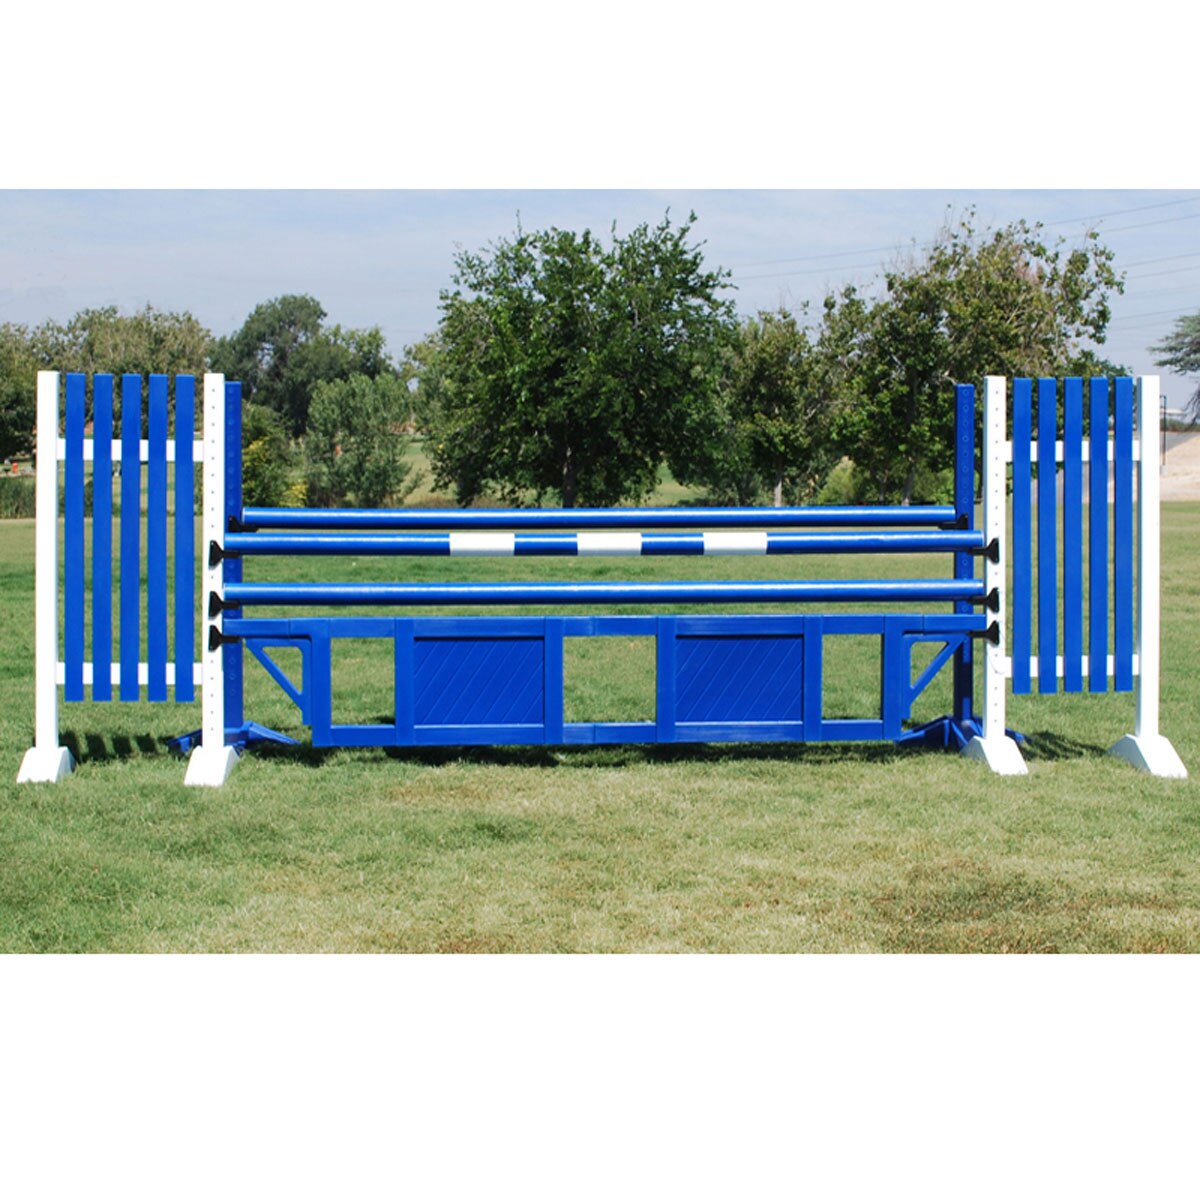 2 Foot Pair Of Horse jump lunging/schooling wings 